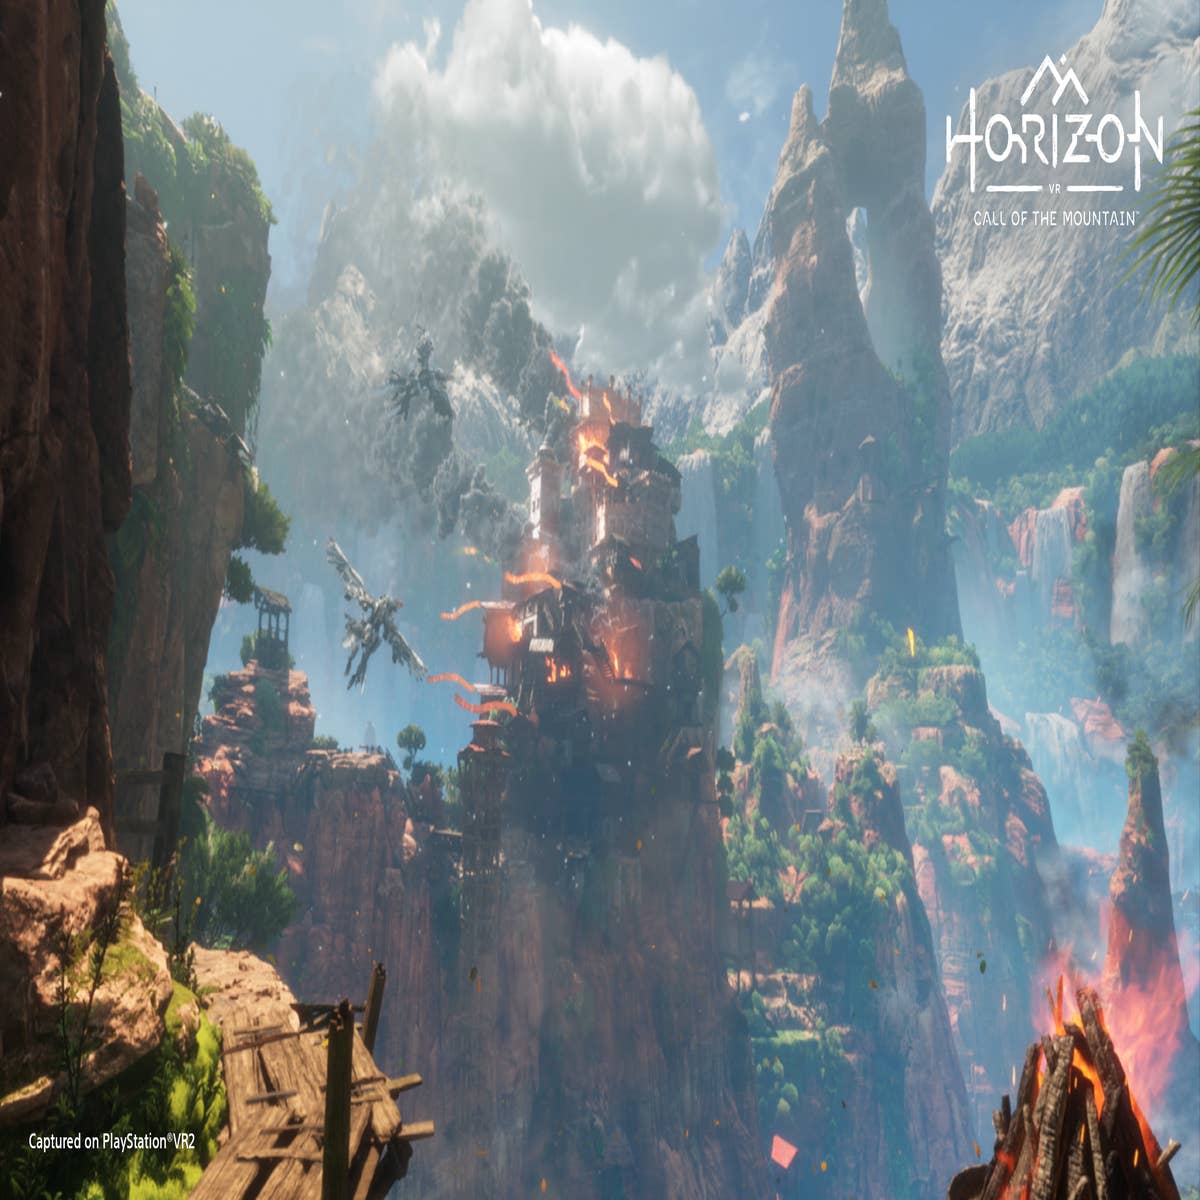 Horizon Call of the Mountain review: Simply amazing!